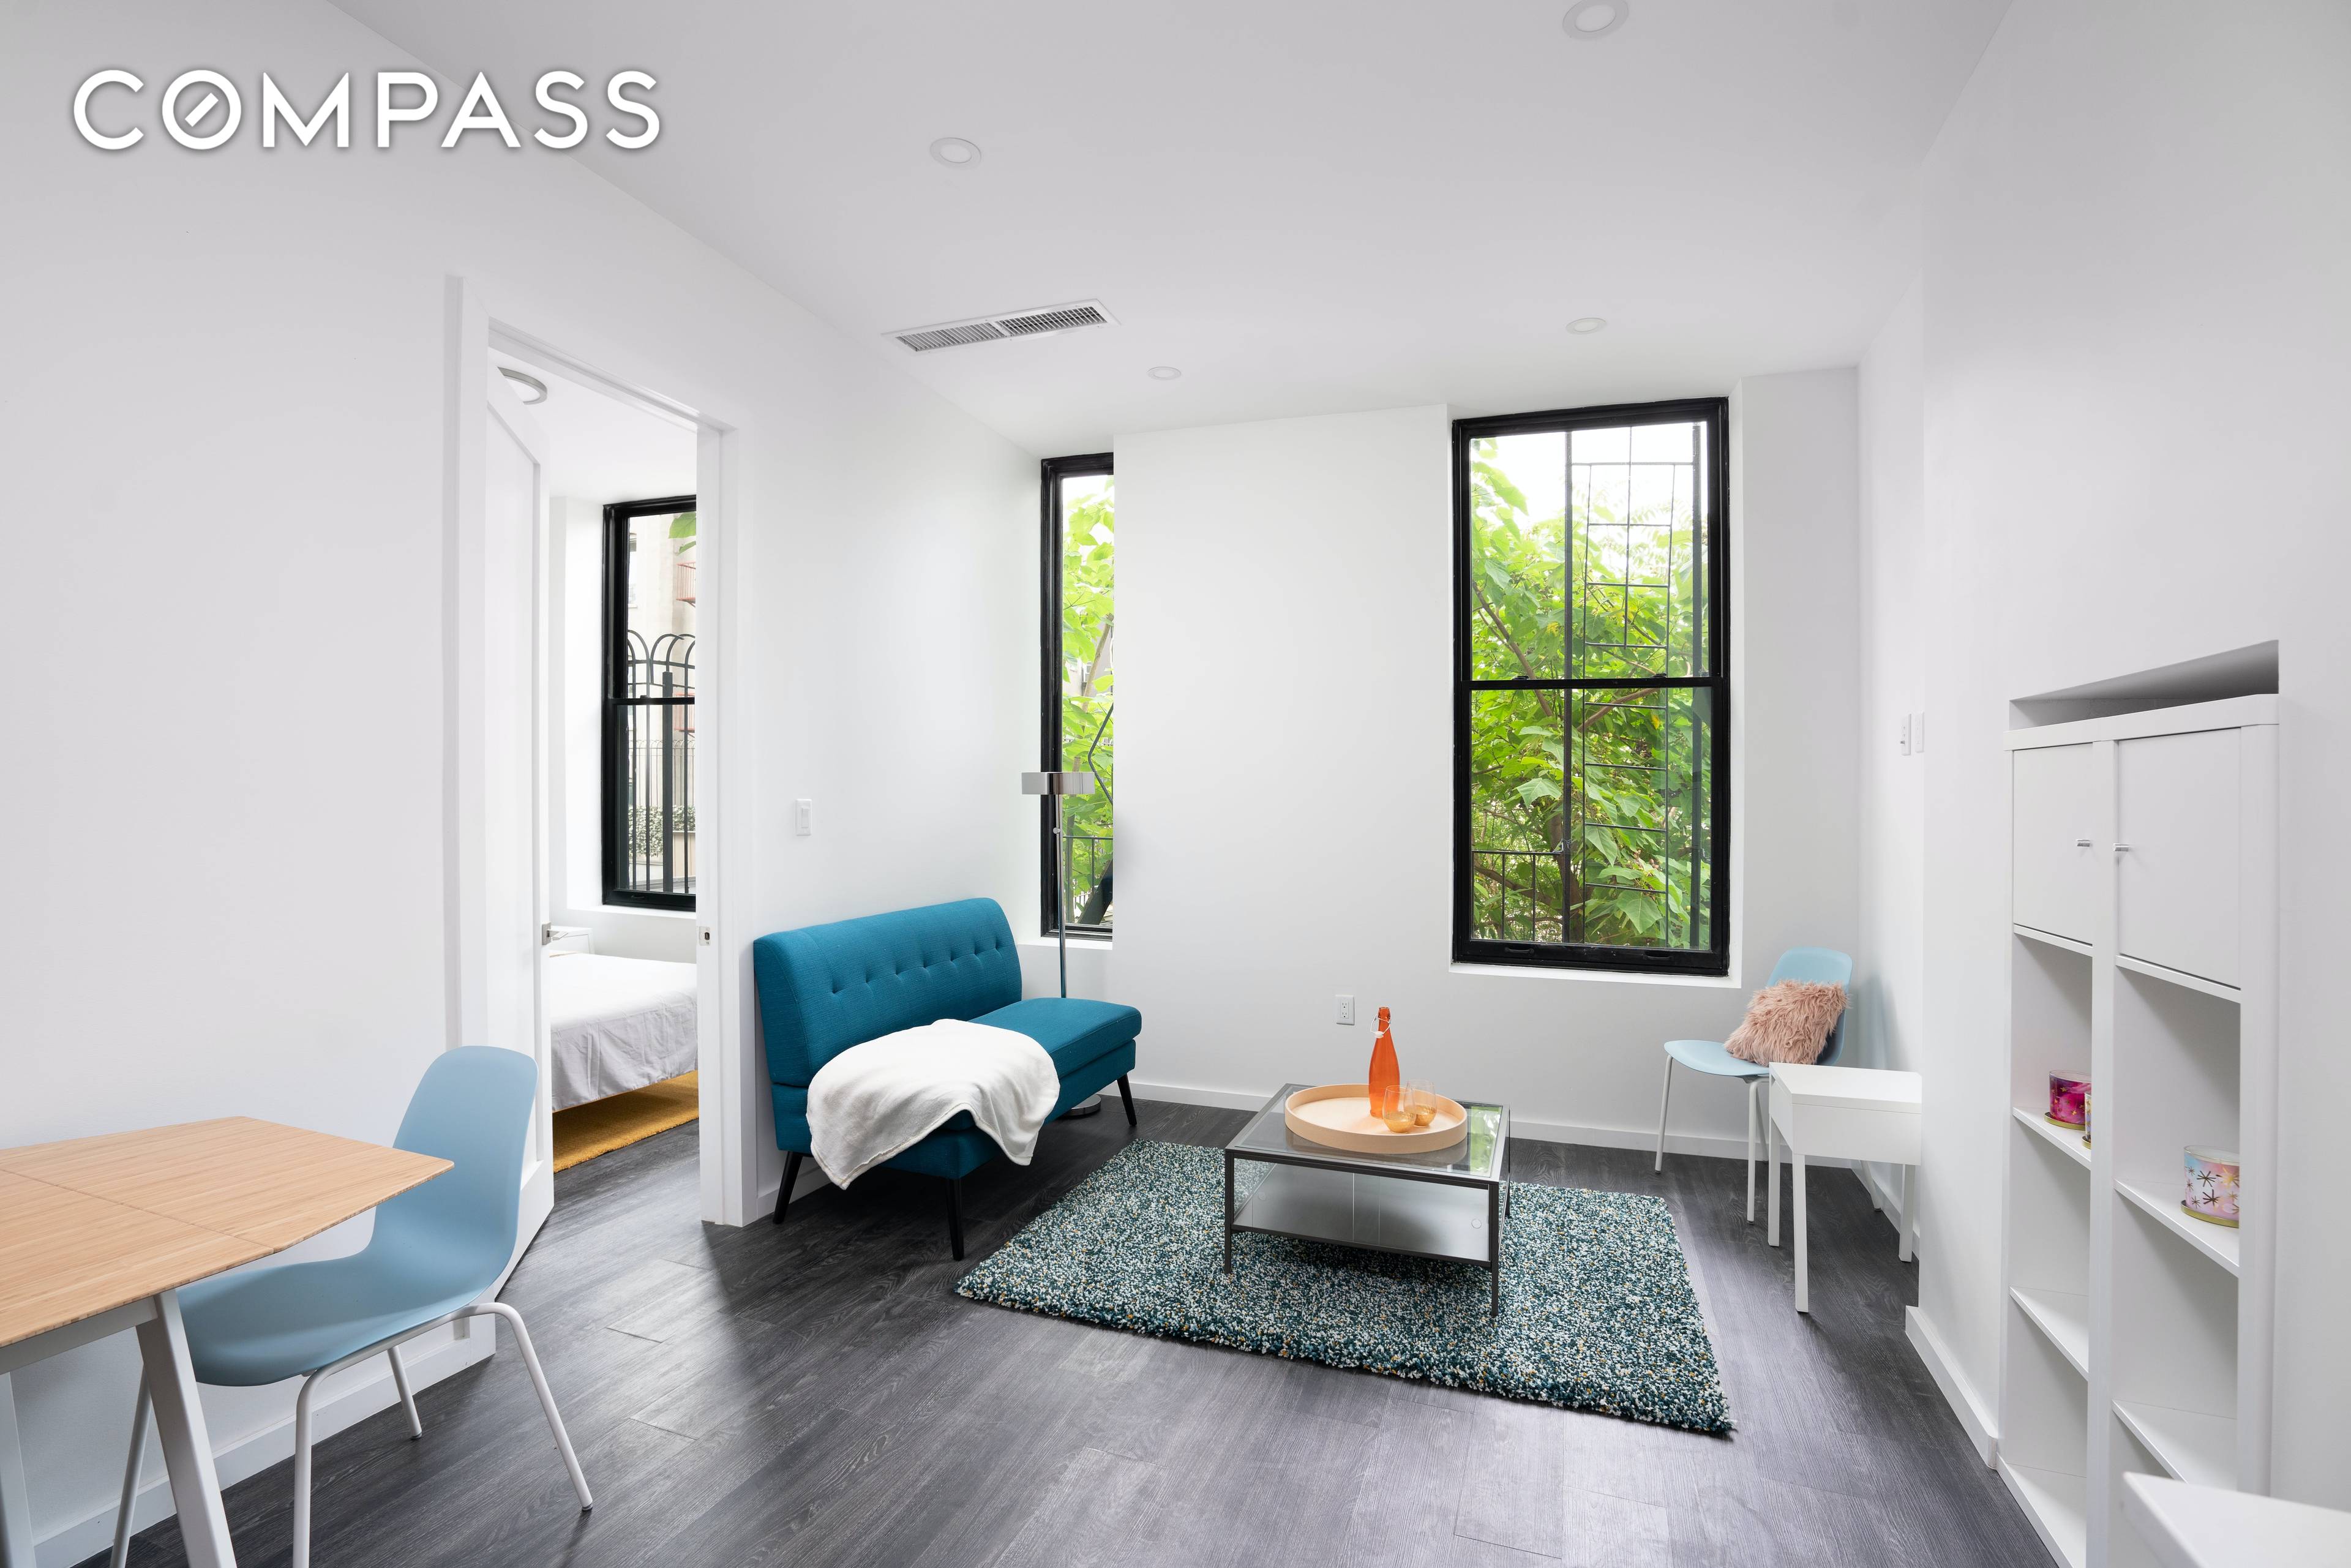 Williamsburg Stunning, Newly Renovated 2BD 1BA Home with Hardwood Flooring, Loft like Ceilings, Sound Proof Windows, Chef s Kitchen with Integrated Appliances, and Video Intercom.